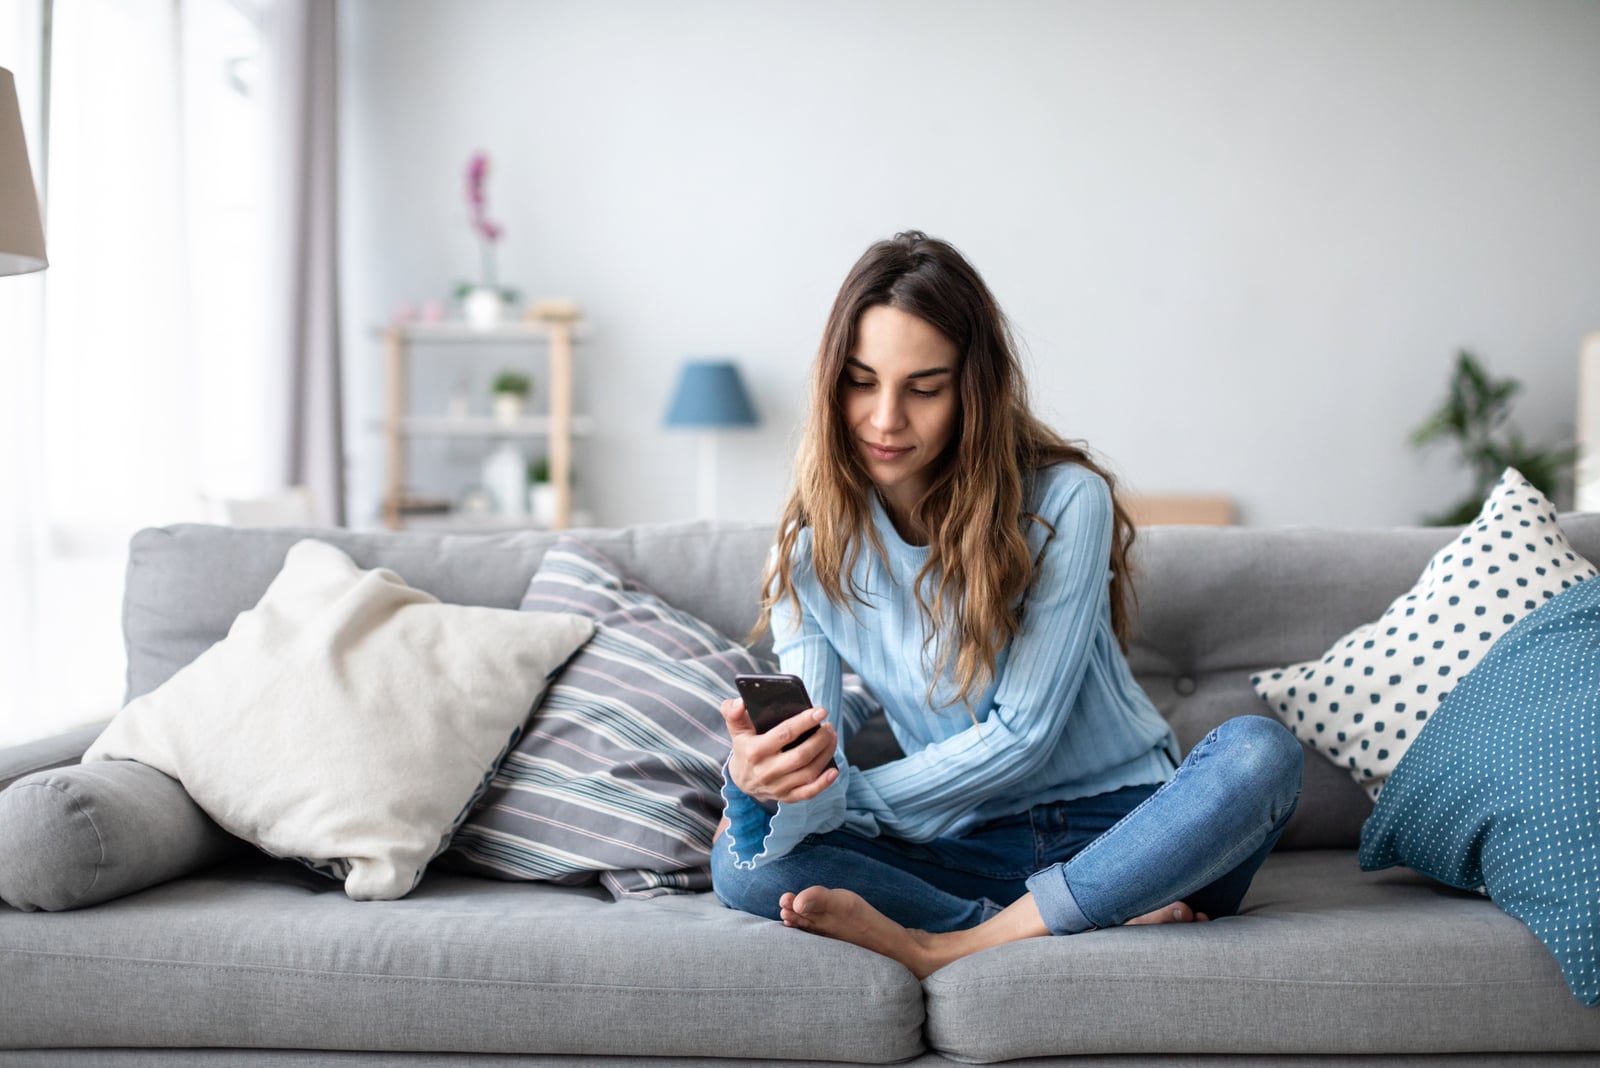 a woman sitting on a couch with a phone in her hand